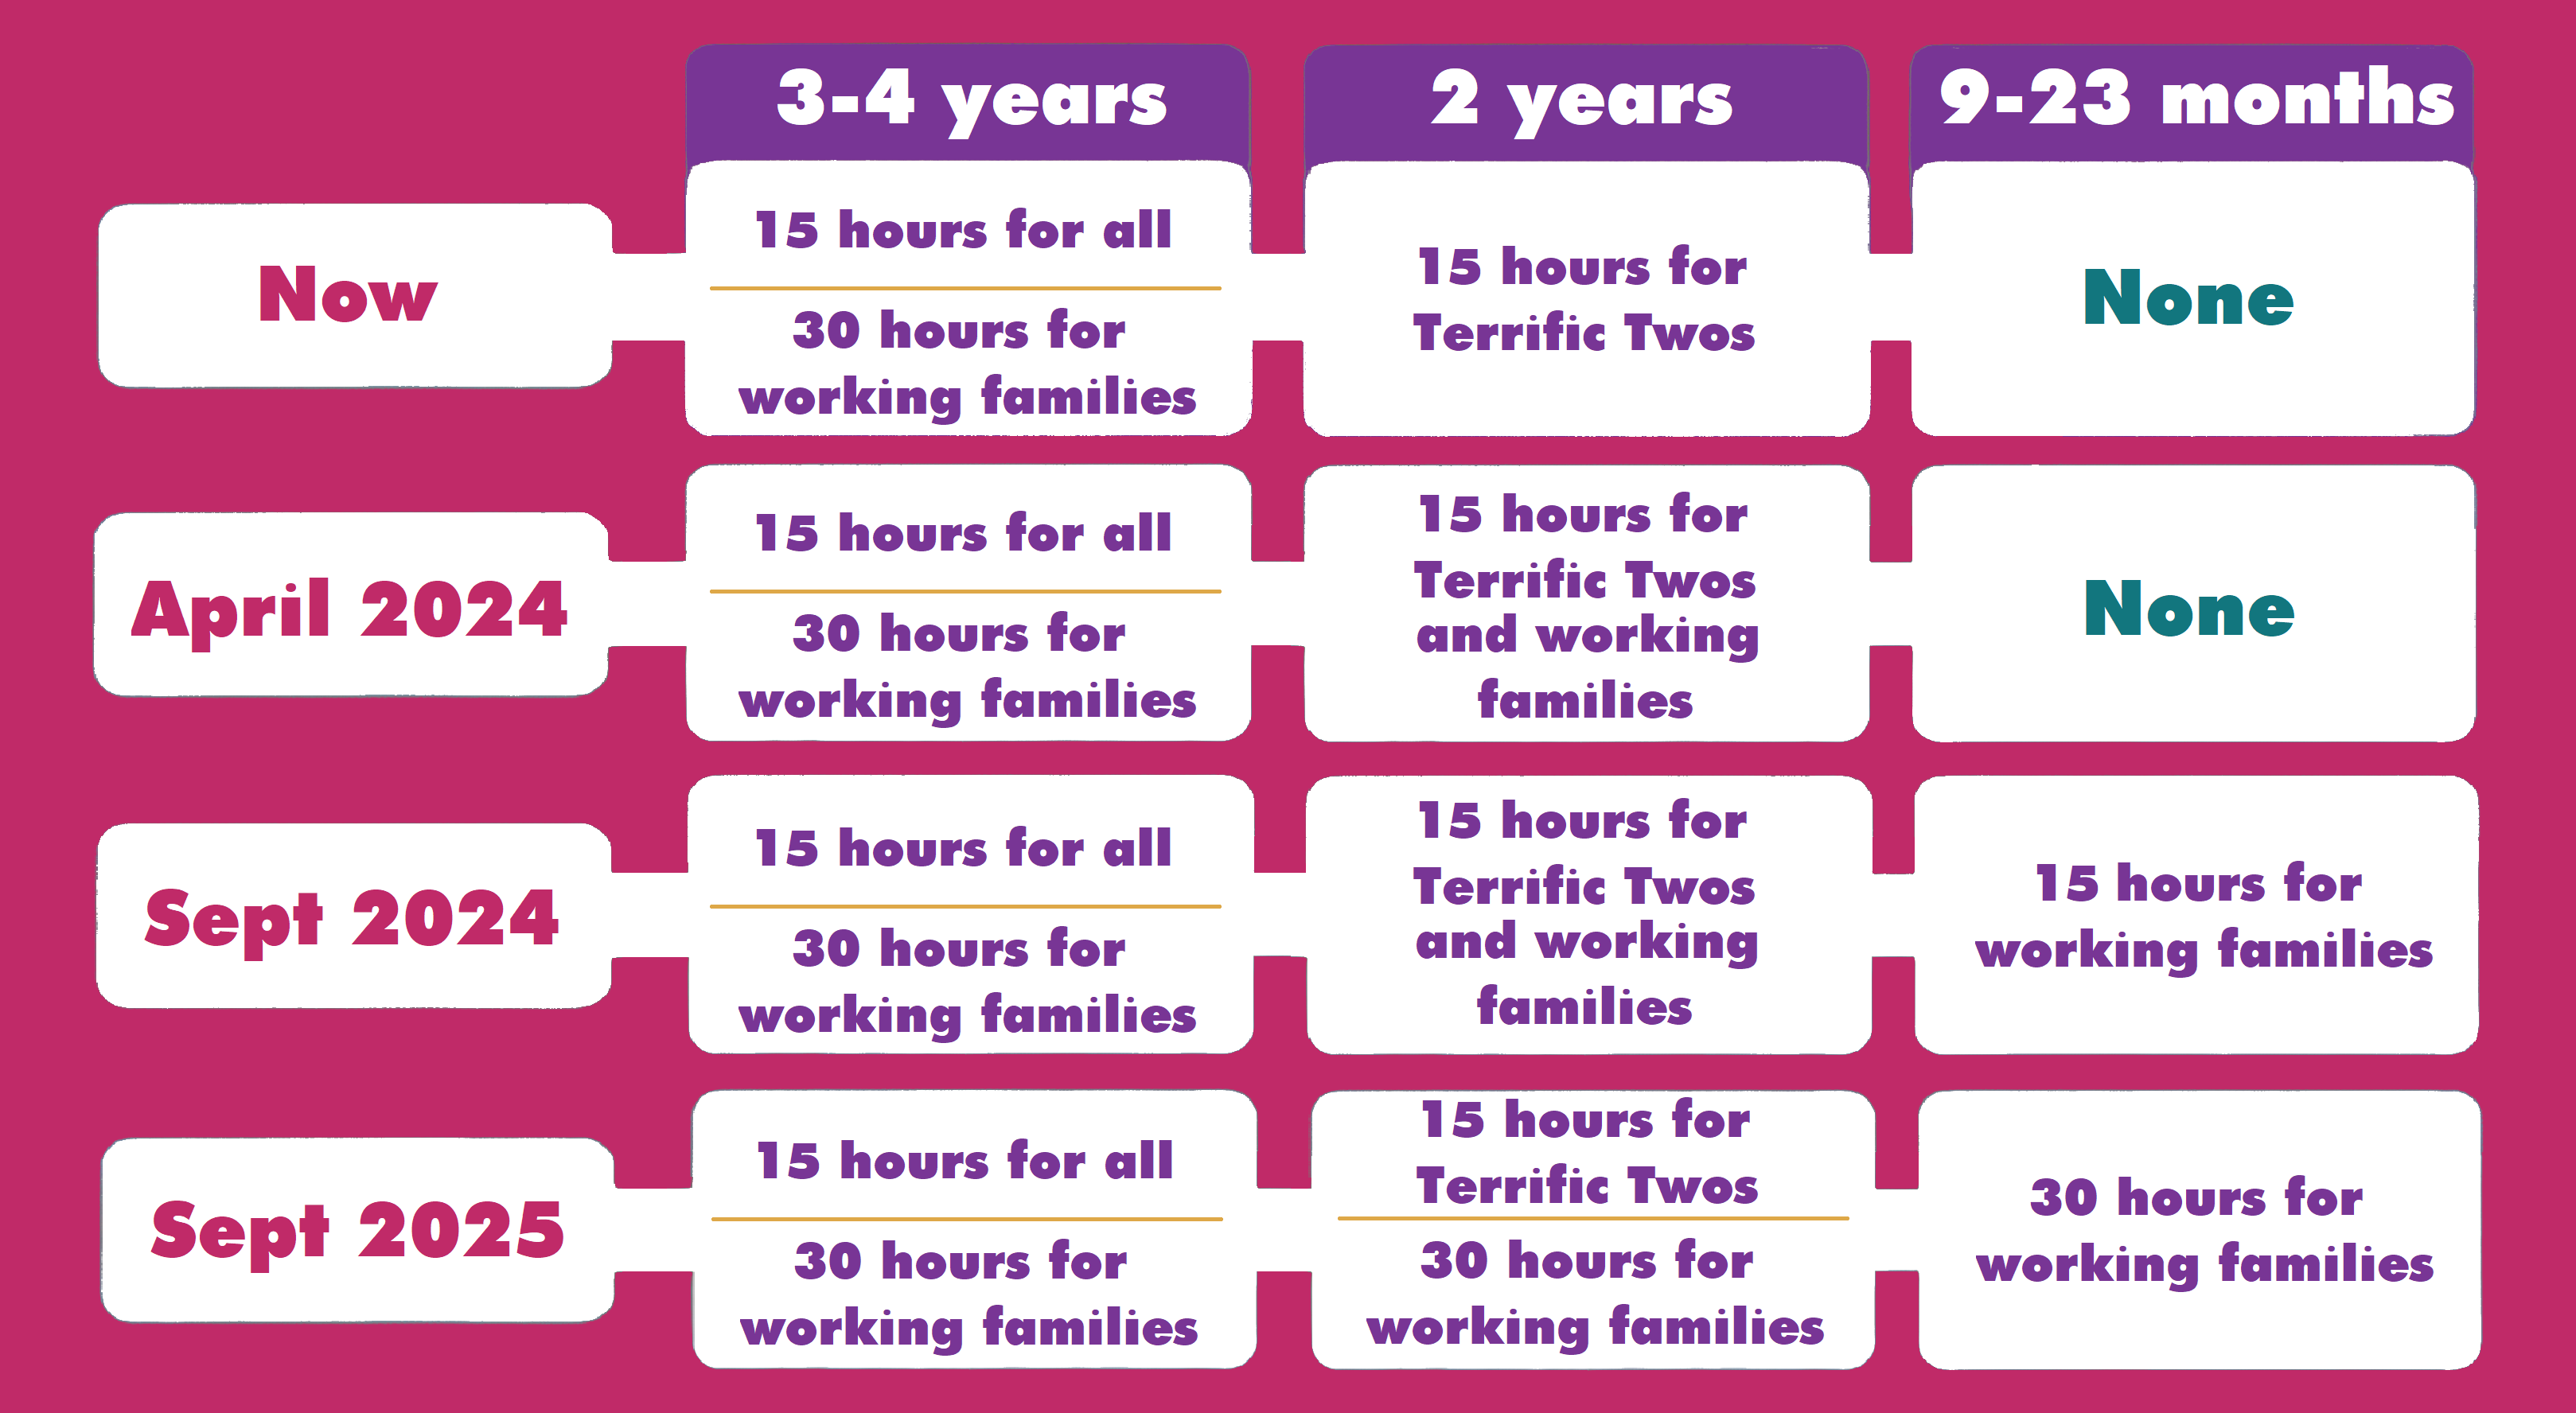 for 3 to 4 year olds, 15 hours for all and 30 hours for working families. for 2 year olds, 15 hours for terrific twos now, working families will be entitled to 15 hours from April 2024 and 30 hours for working families from September 2025; 9 to 23 month olds from working families entitled to 15 hours from September 2024 and 30 hours from September 2025